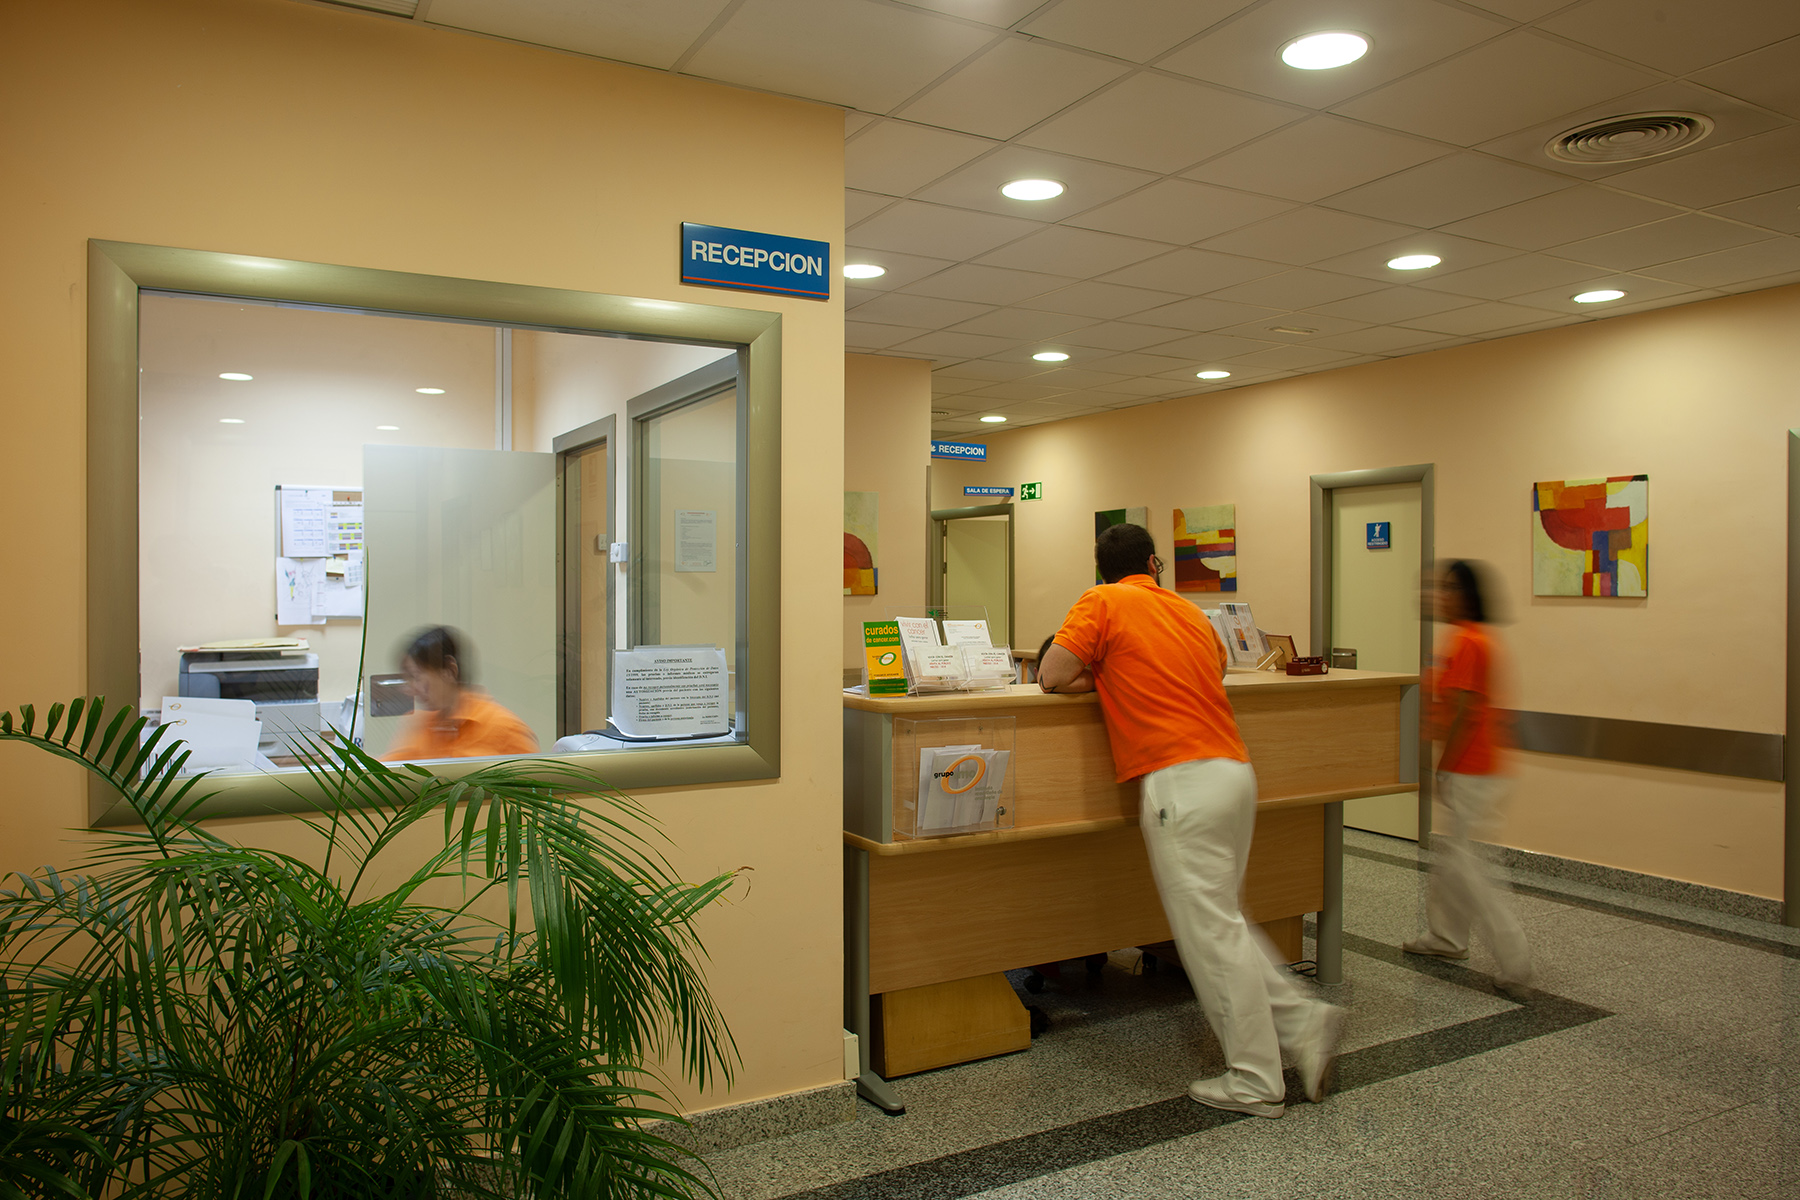 Reception desk at a clinic in Spain